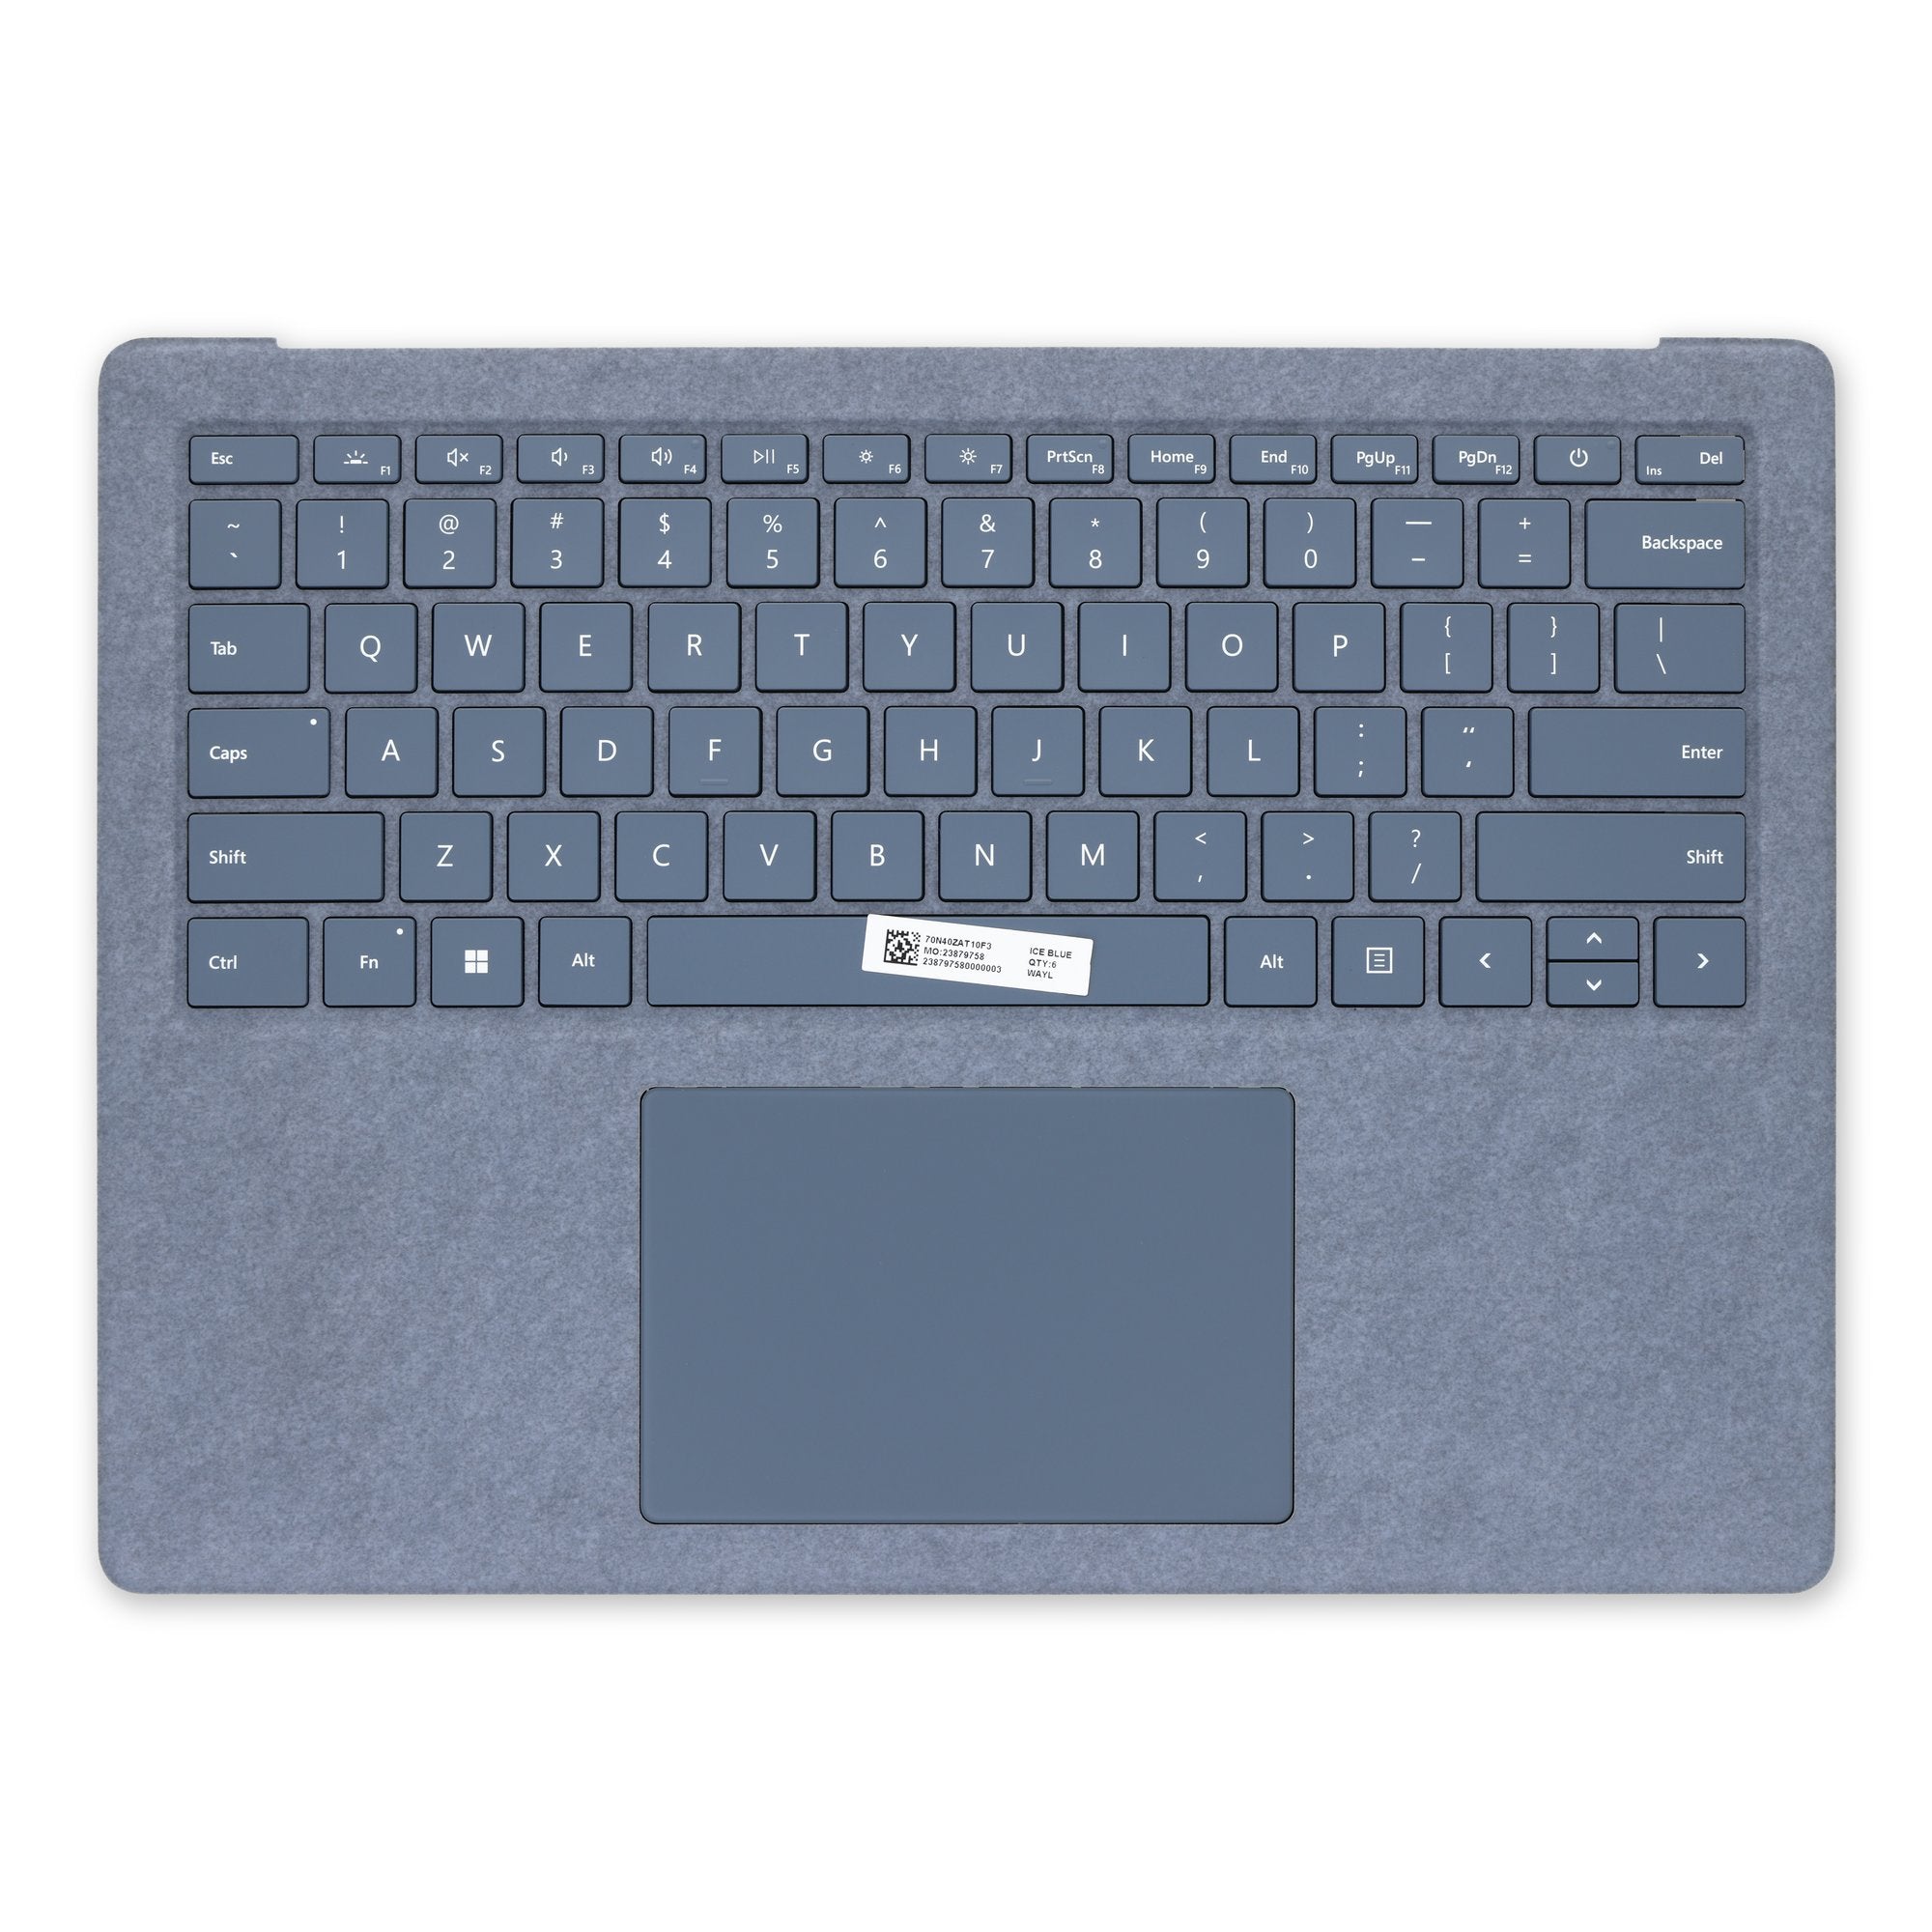 Surface Laptop 4 13.5" (Model 1950, 1958) Top Cover and Keyboard - Genuine Ice Blue New English Keyboard